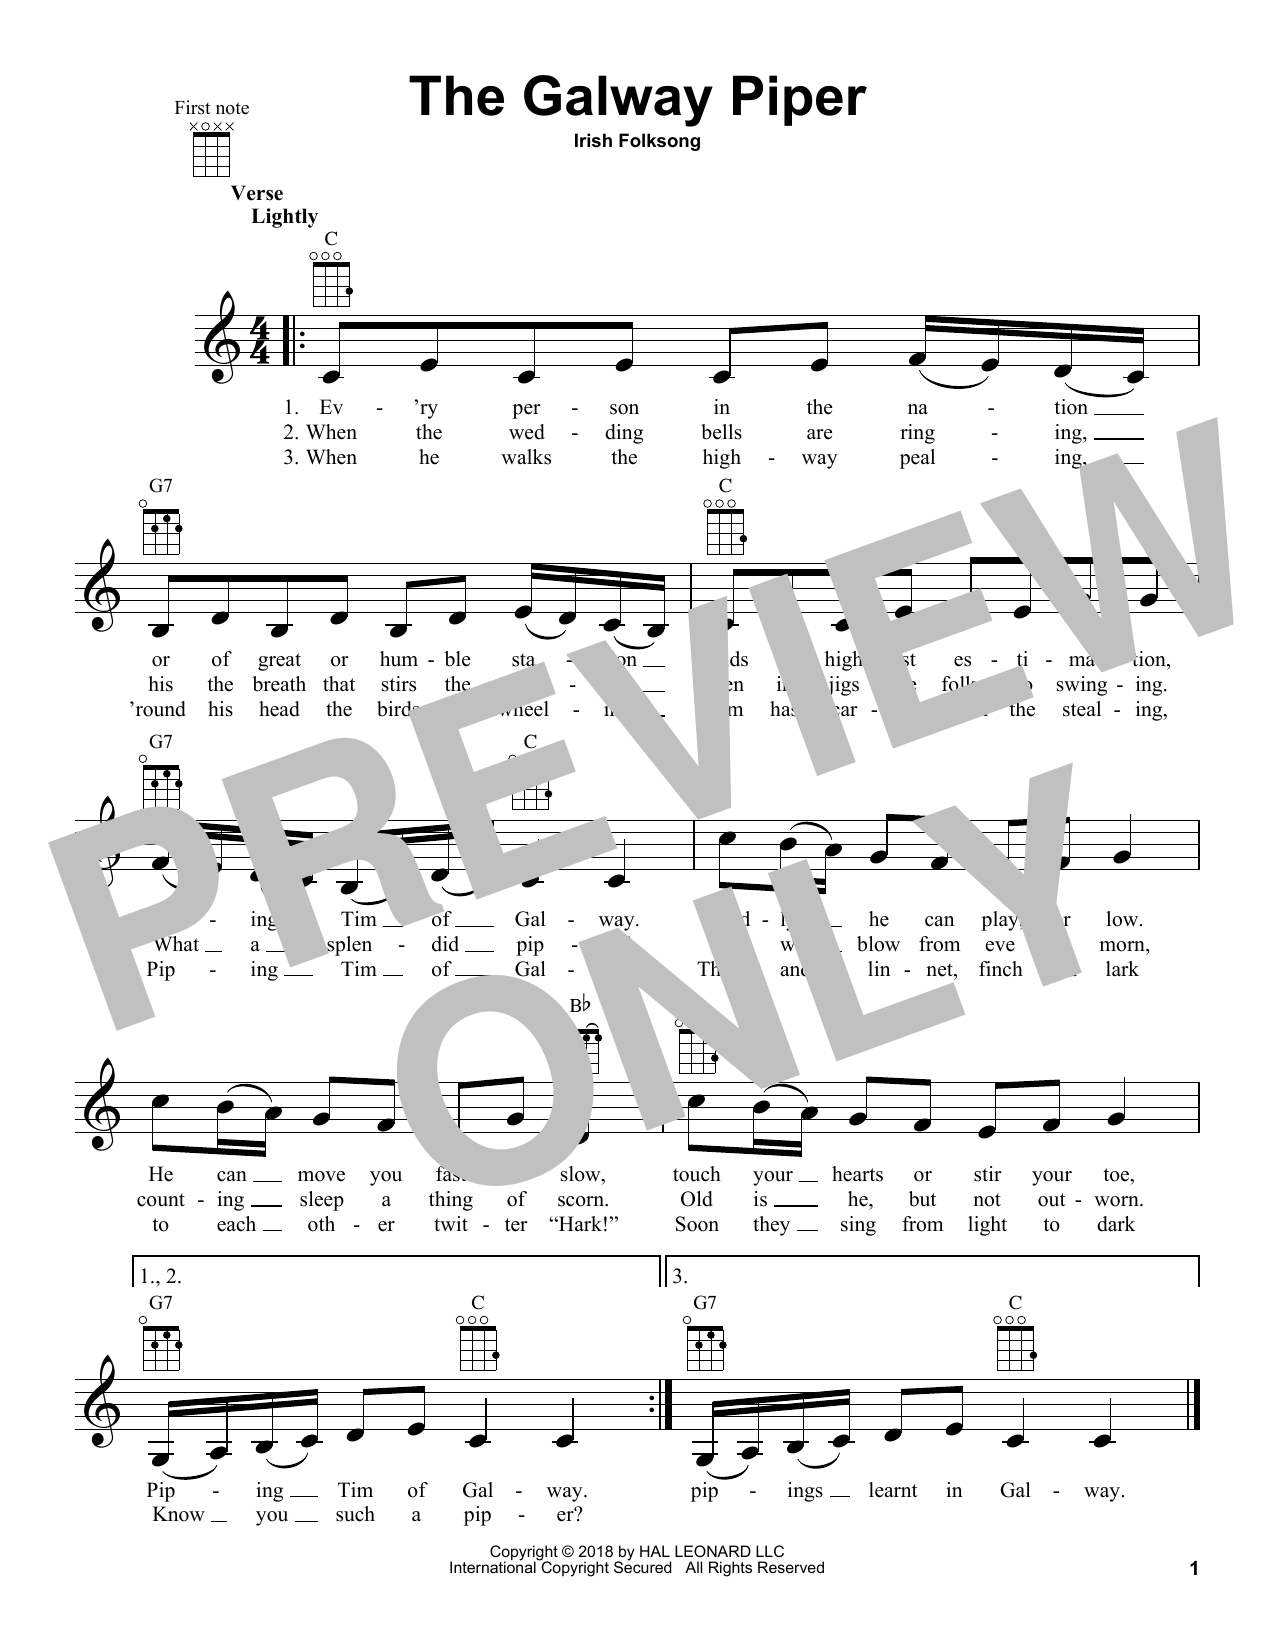 Download Irish Folksong The Galway Piper Sheet Music